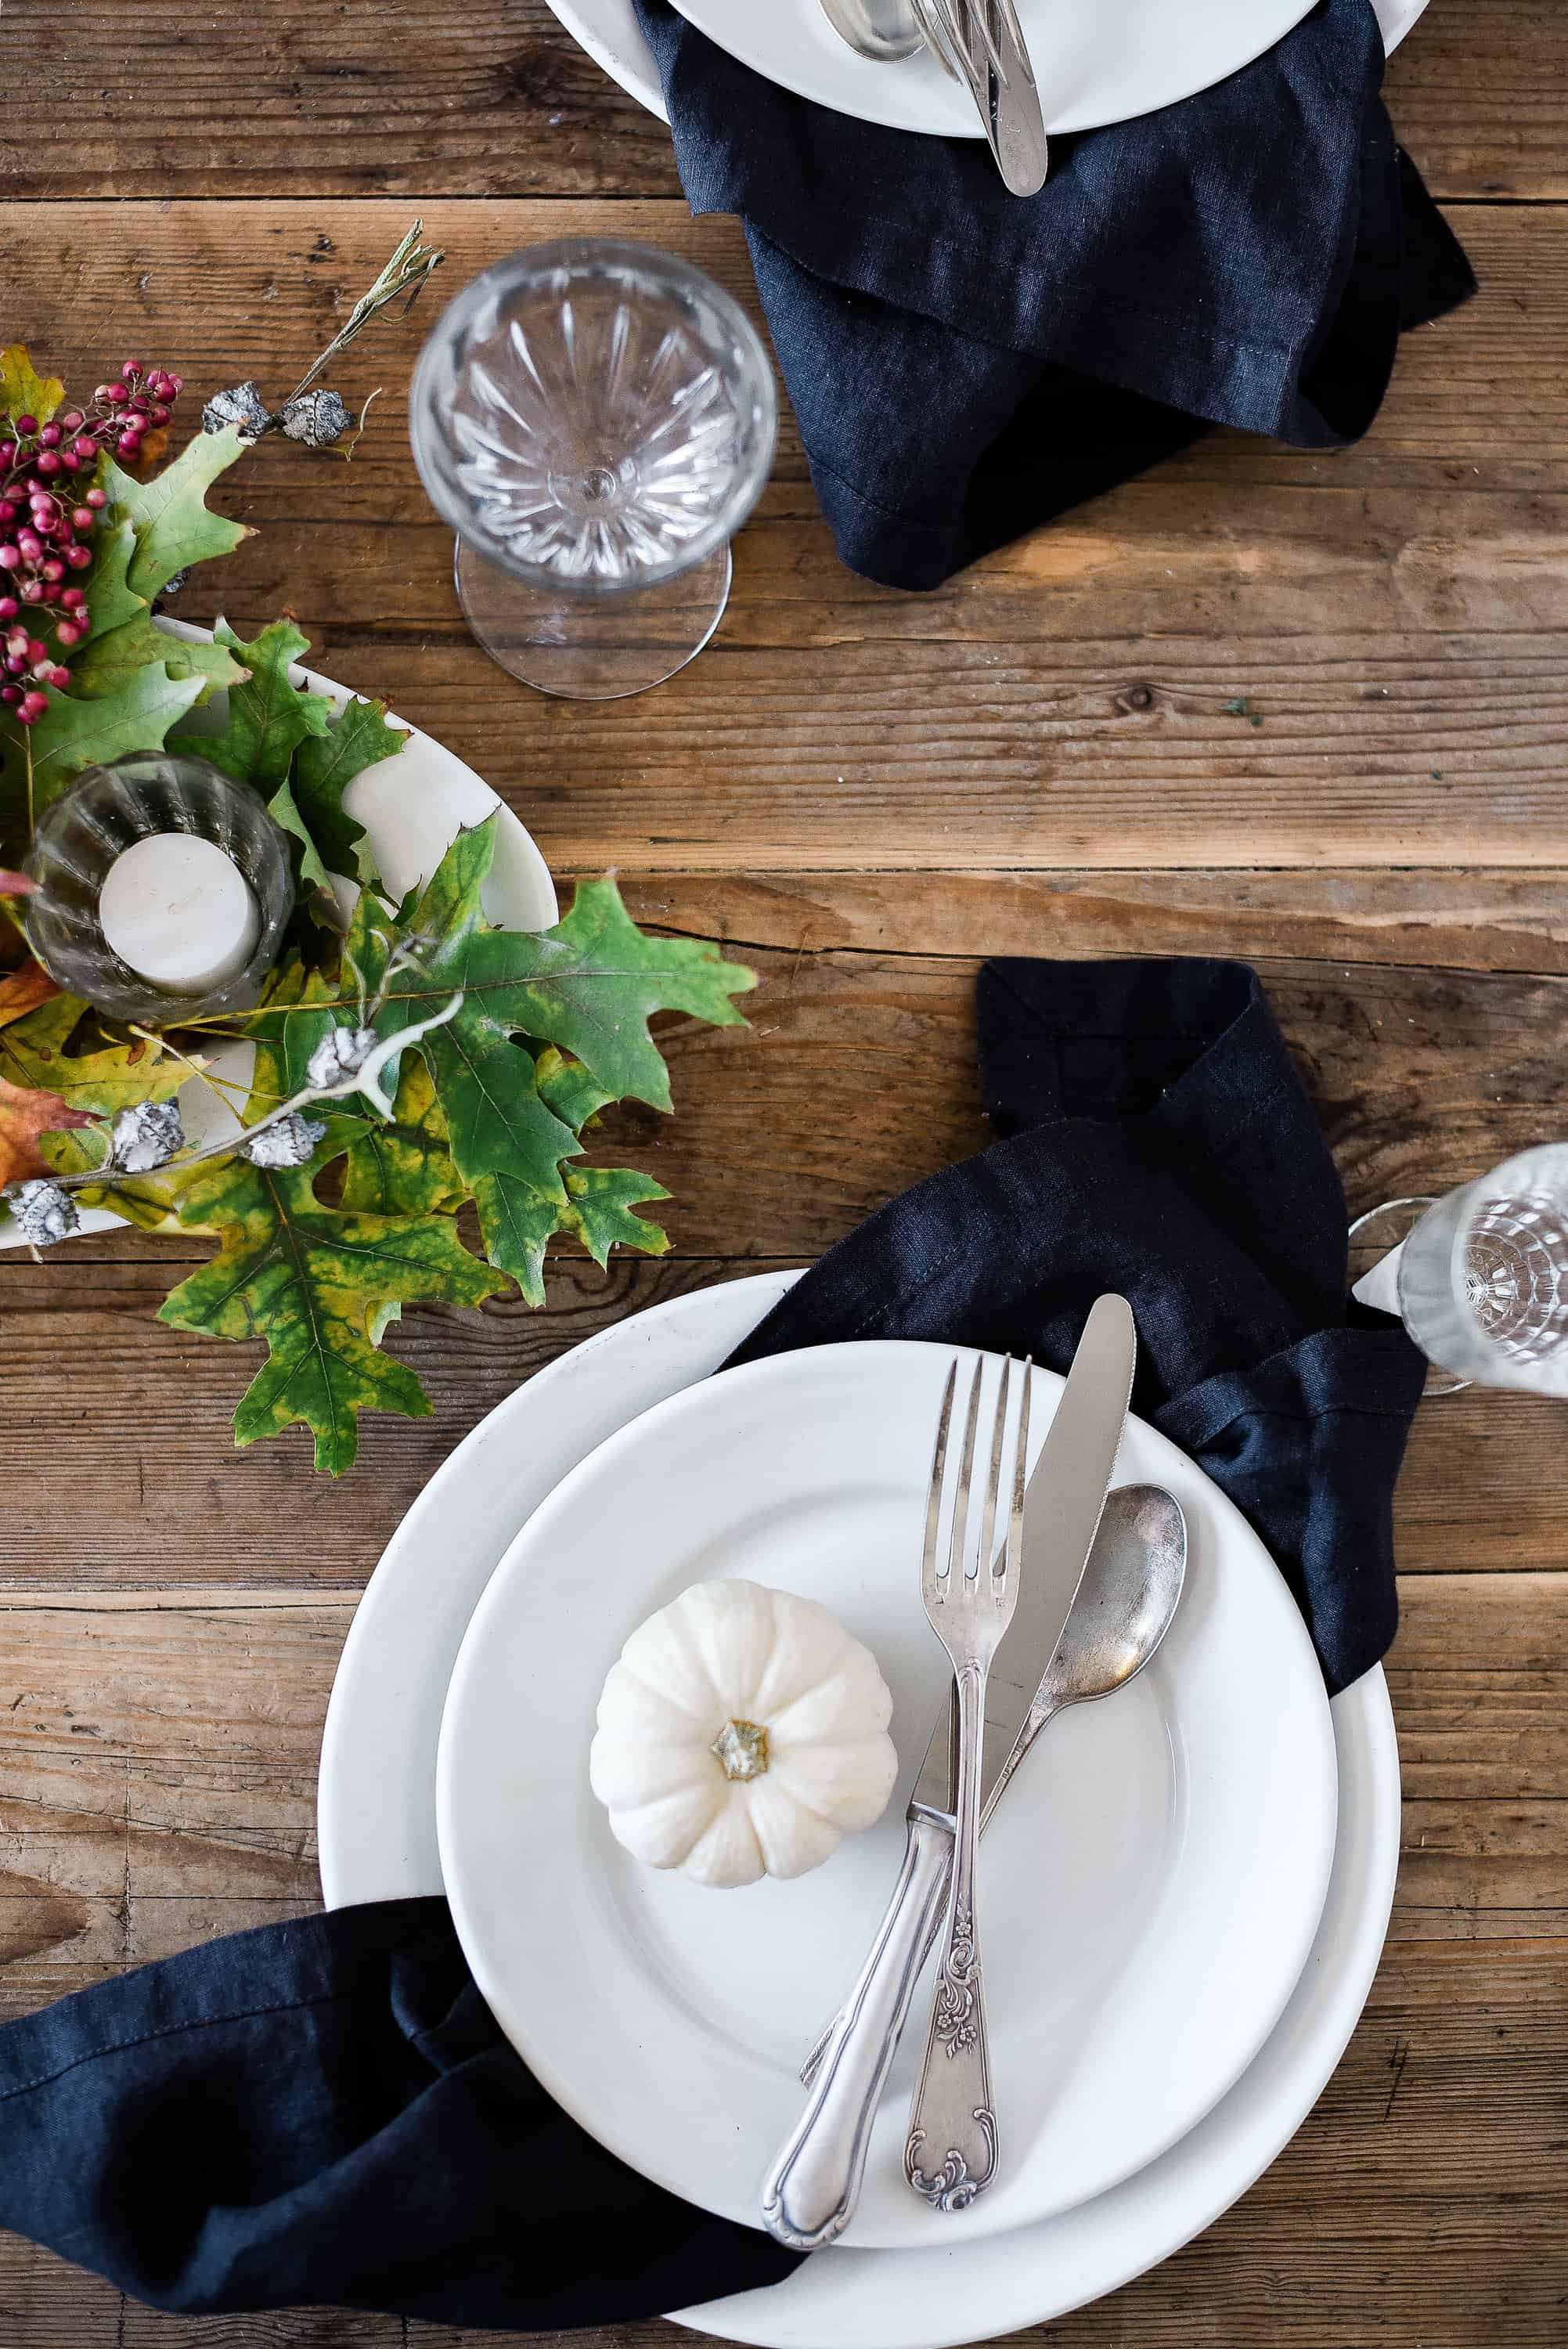 Thanksgiving is a time to celebrate all that we are thankful for with food, family, and friends! Dress up your table this year with some of these beautiful Thanksgiving tablescape ideas!